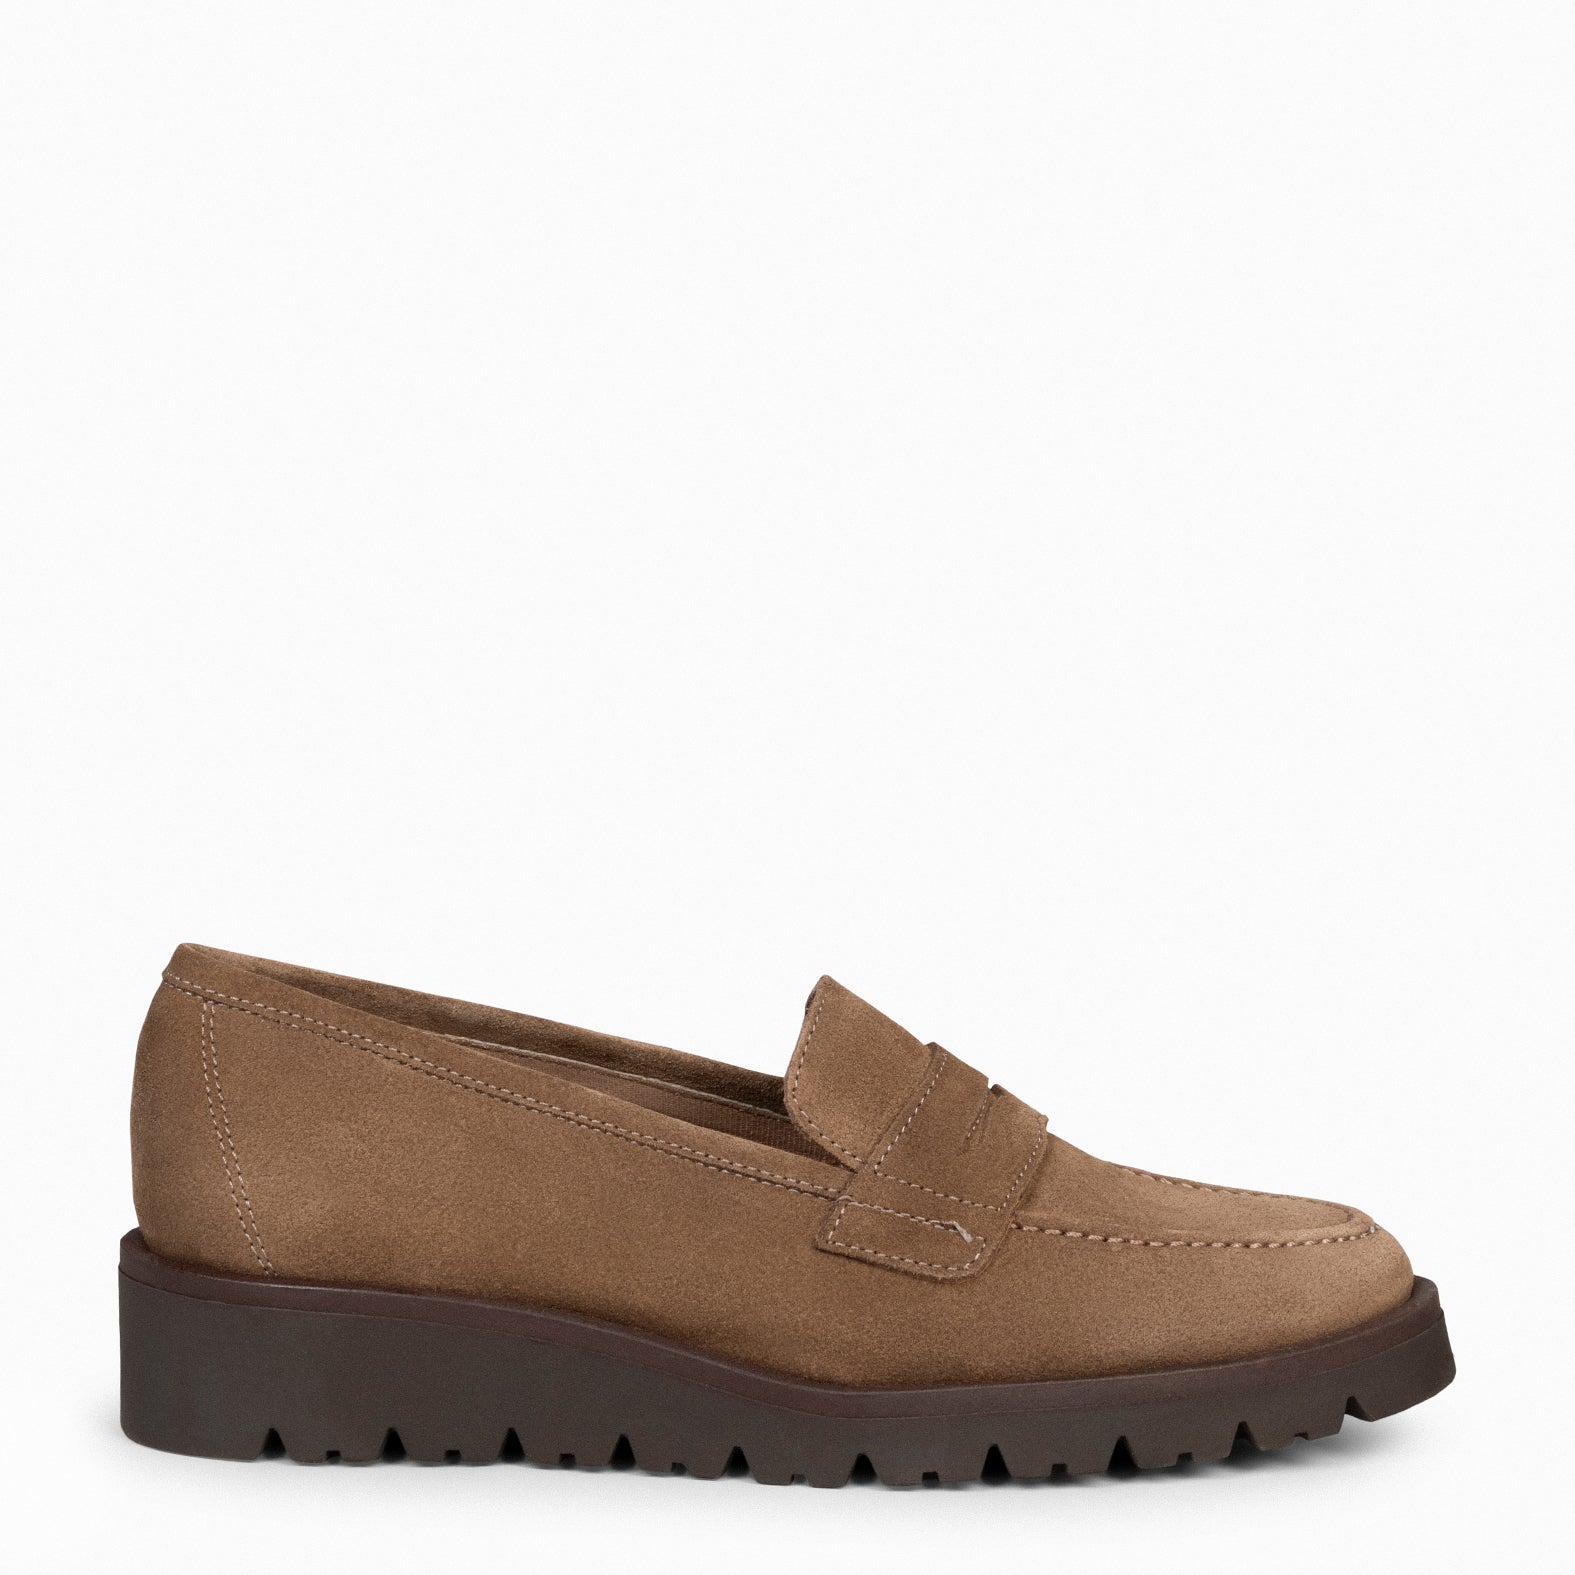 DAPHNE - TAUPE wedge moccasins